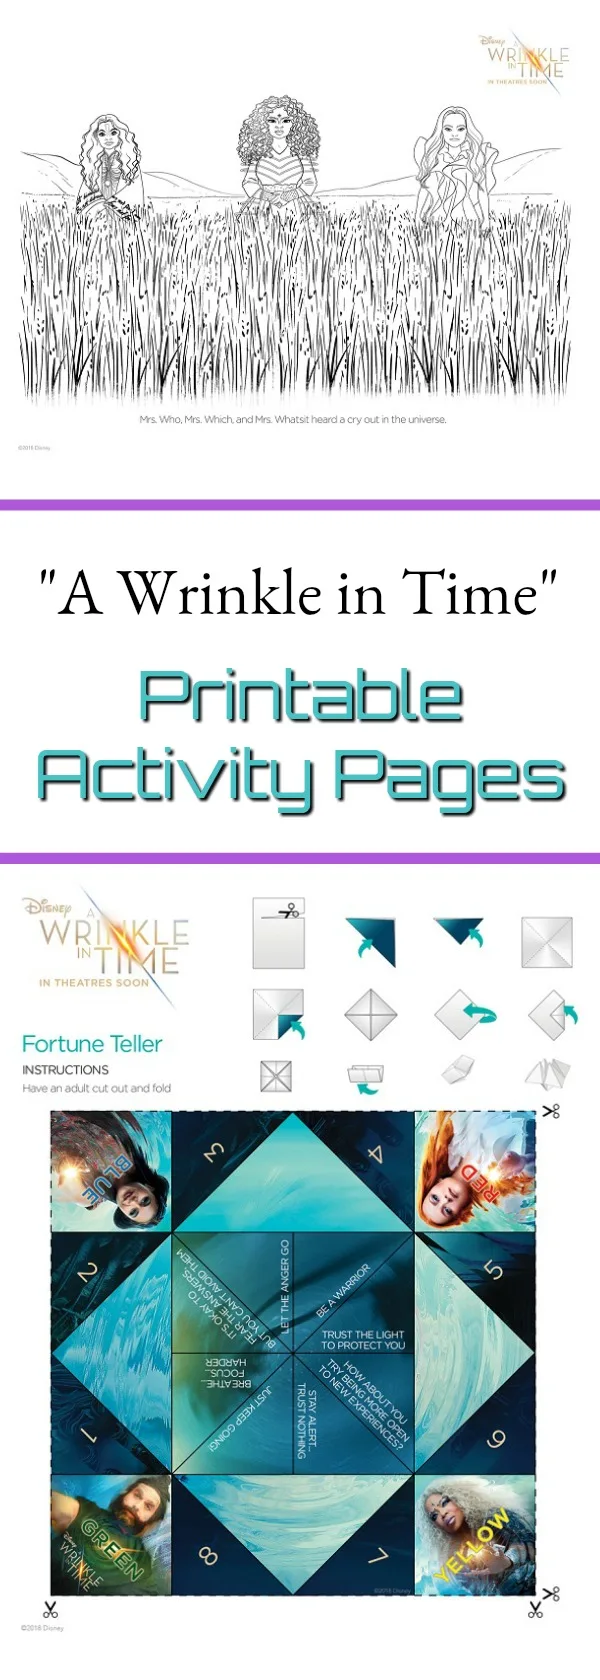 Are you excited to see "A Wrinkle in Time" the movie? Grab these FREE A Wrinkle in Time printable coloring and activity pages featuring the main characters!